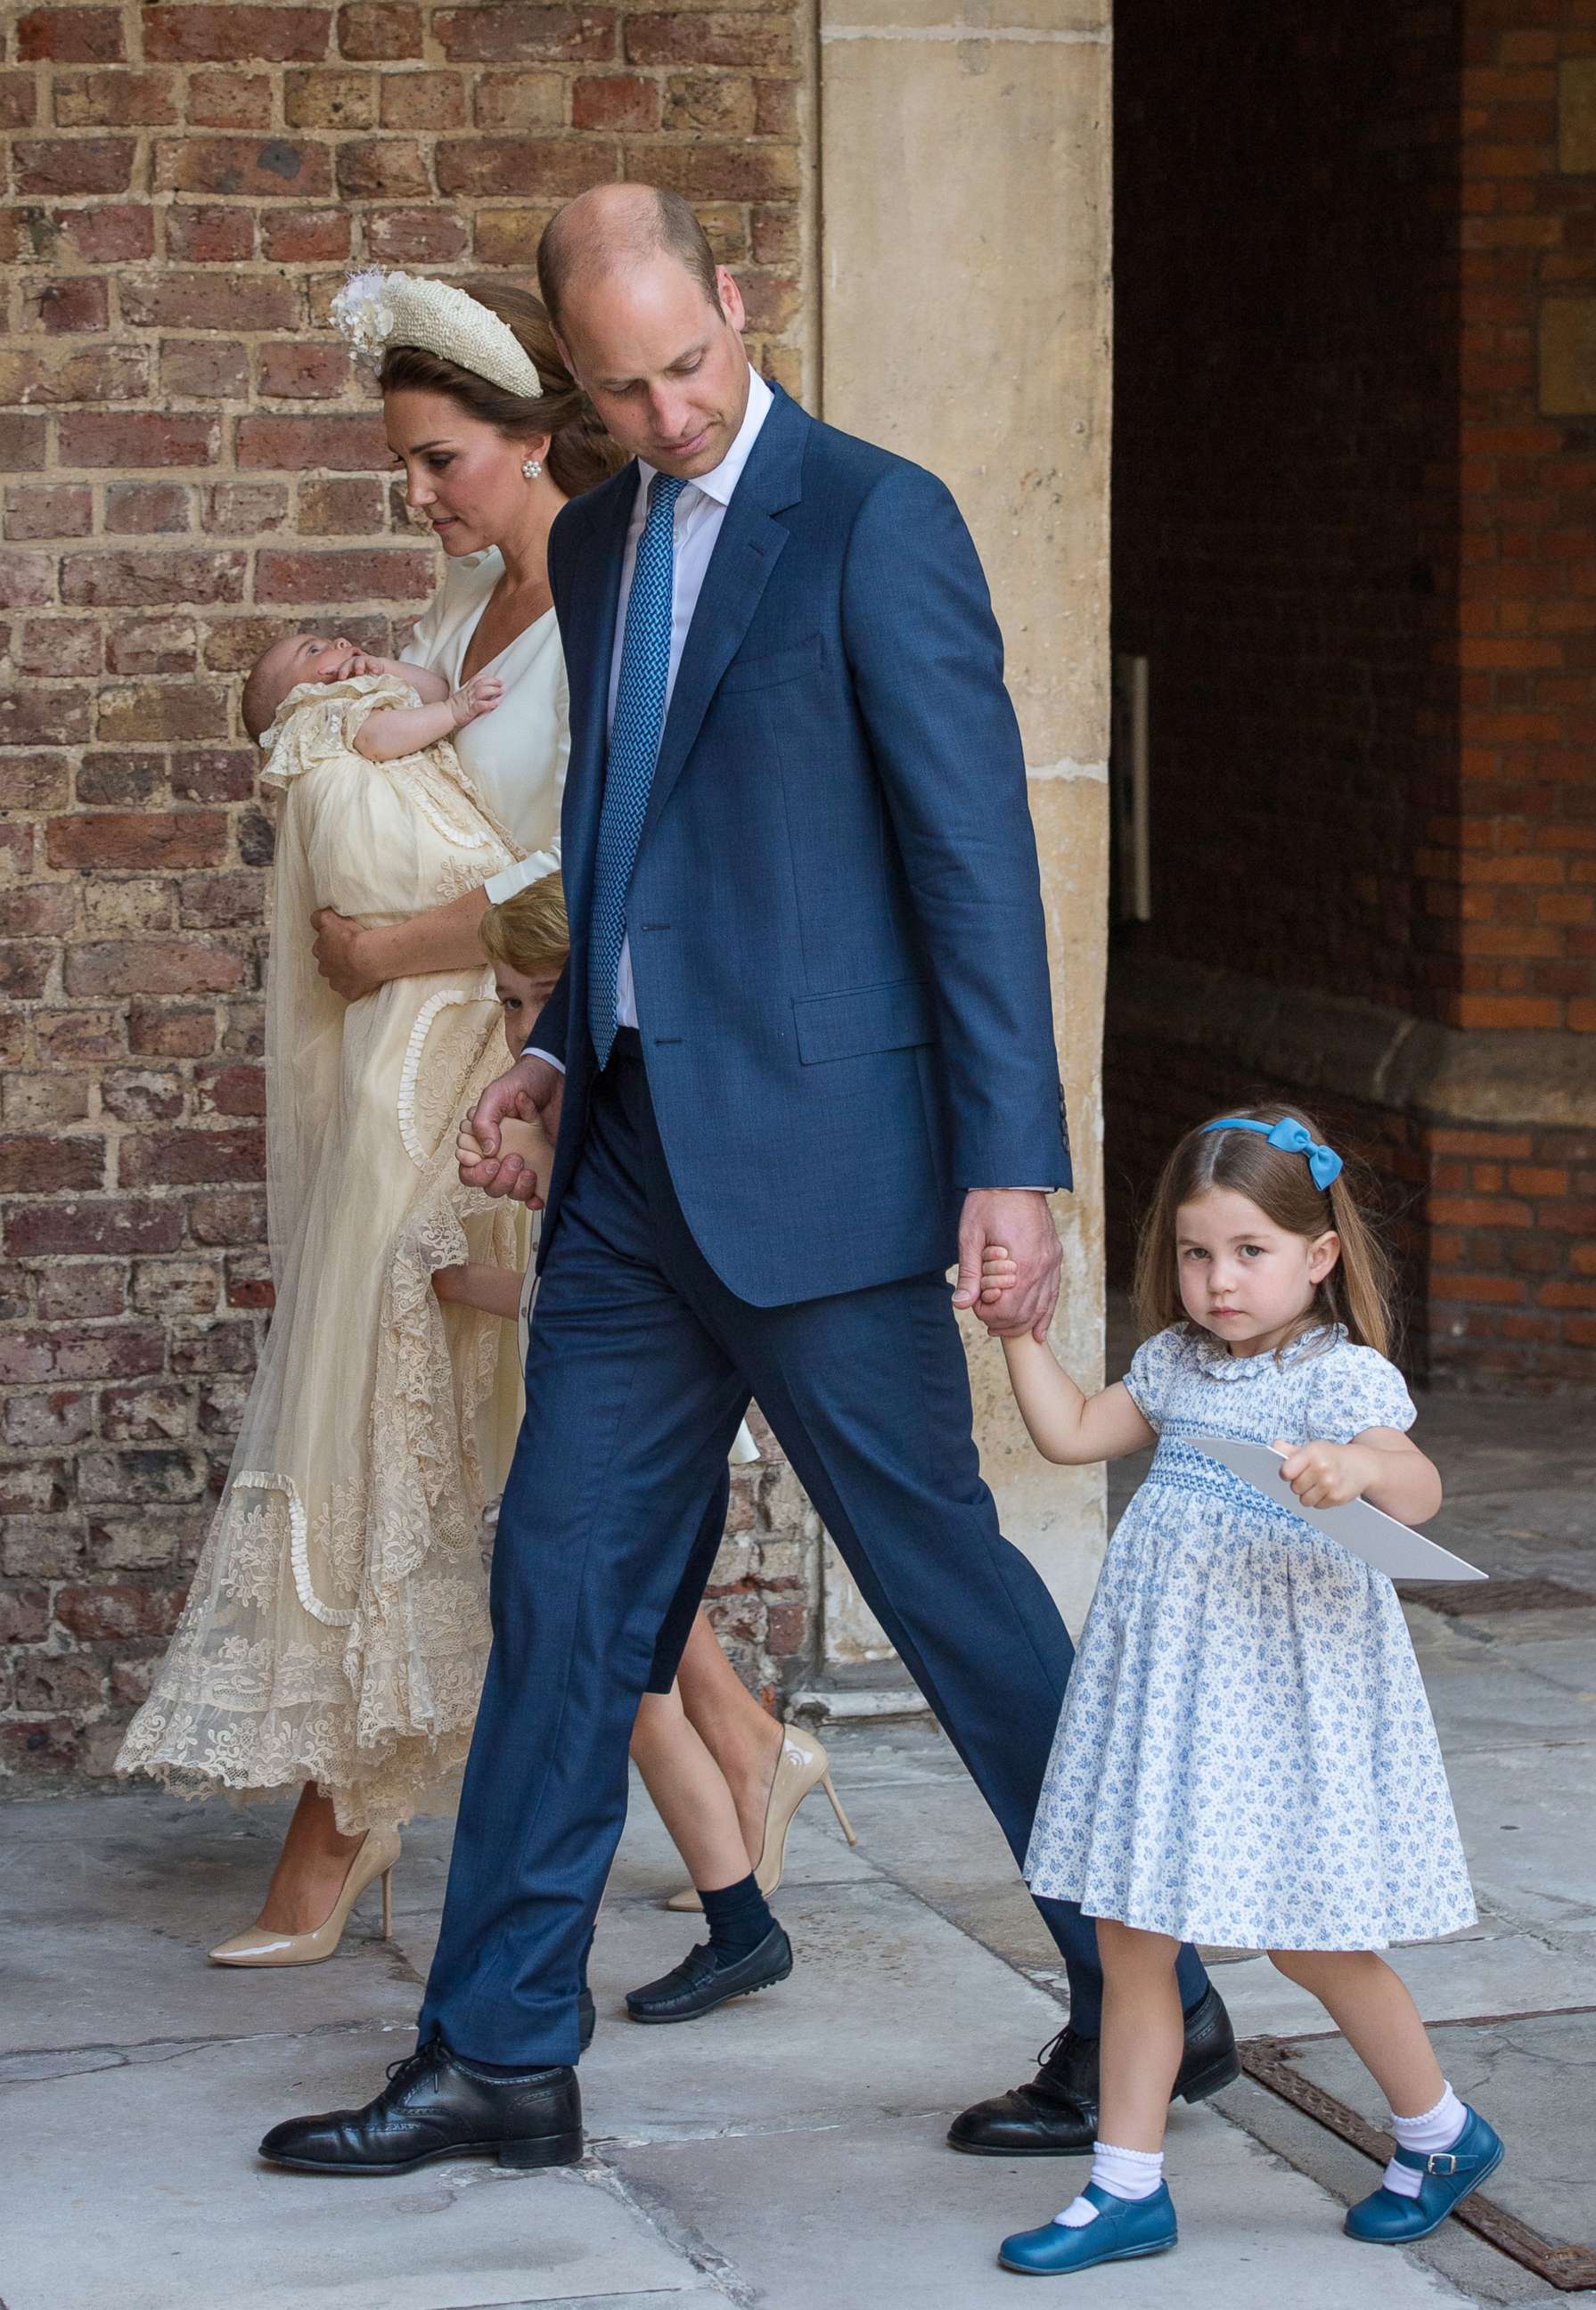 PHOTO: Prince William, Duke of Cambridge and Catherine, Duchess of Cambridge with their children Prince George, Princess Charlotte and Prince Louis leave after Prince Louis' christening at St. James's Palace in London, July 9, 2018.